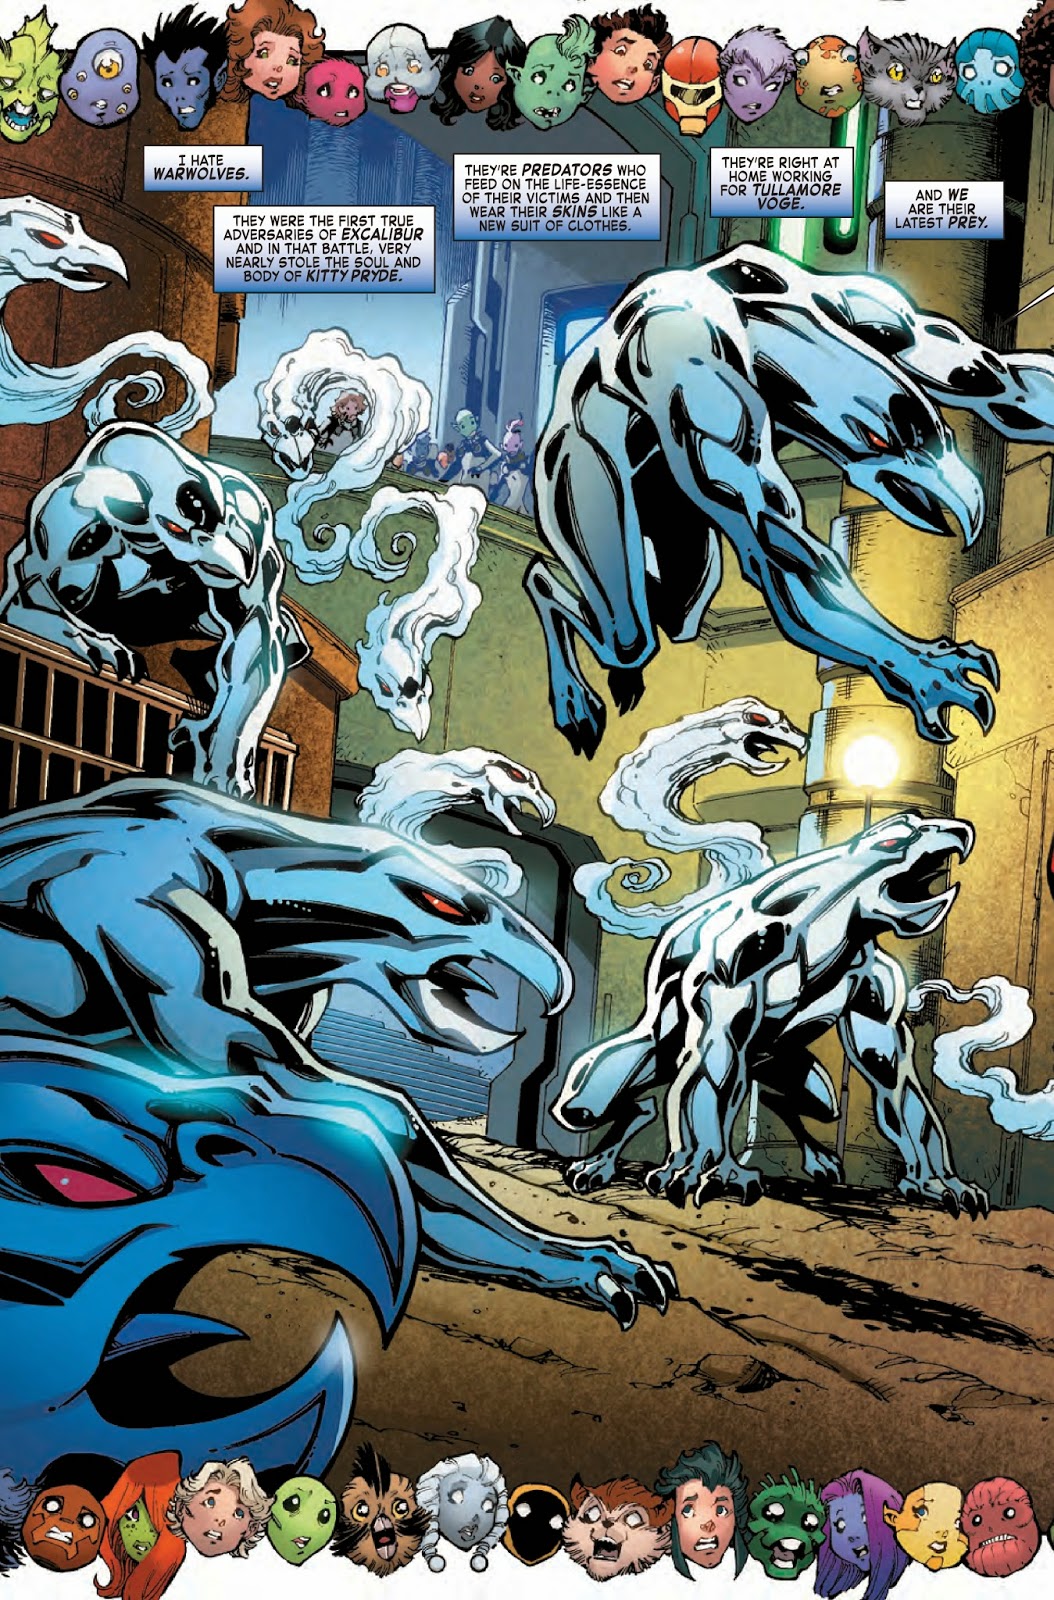 The Warwolves face off with Nightcrawler